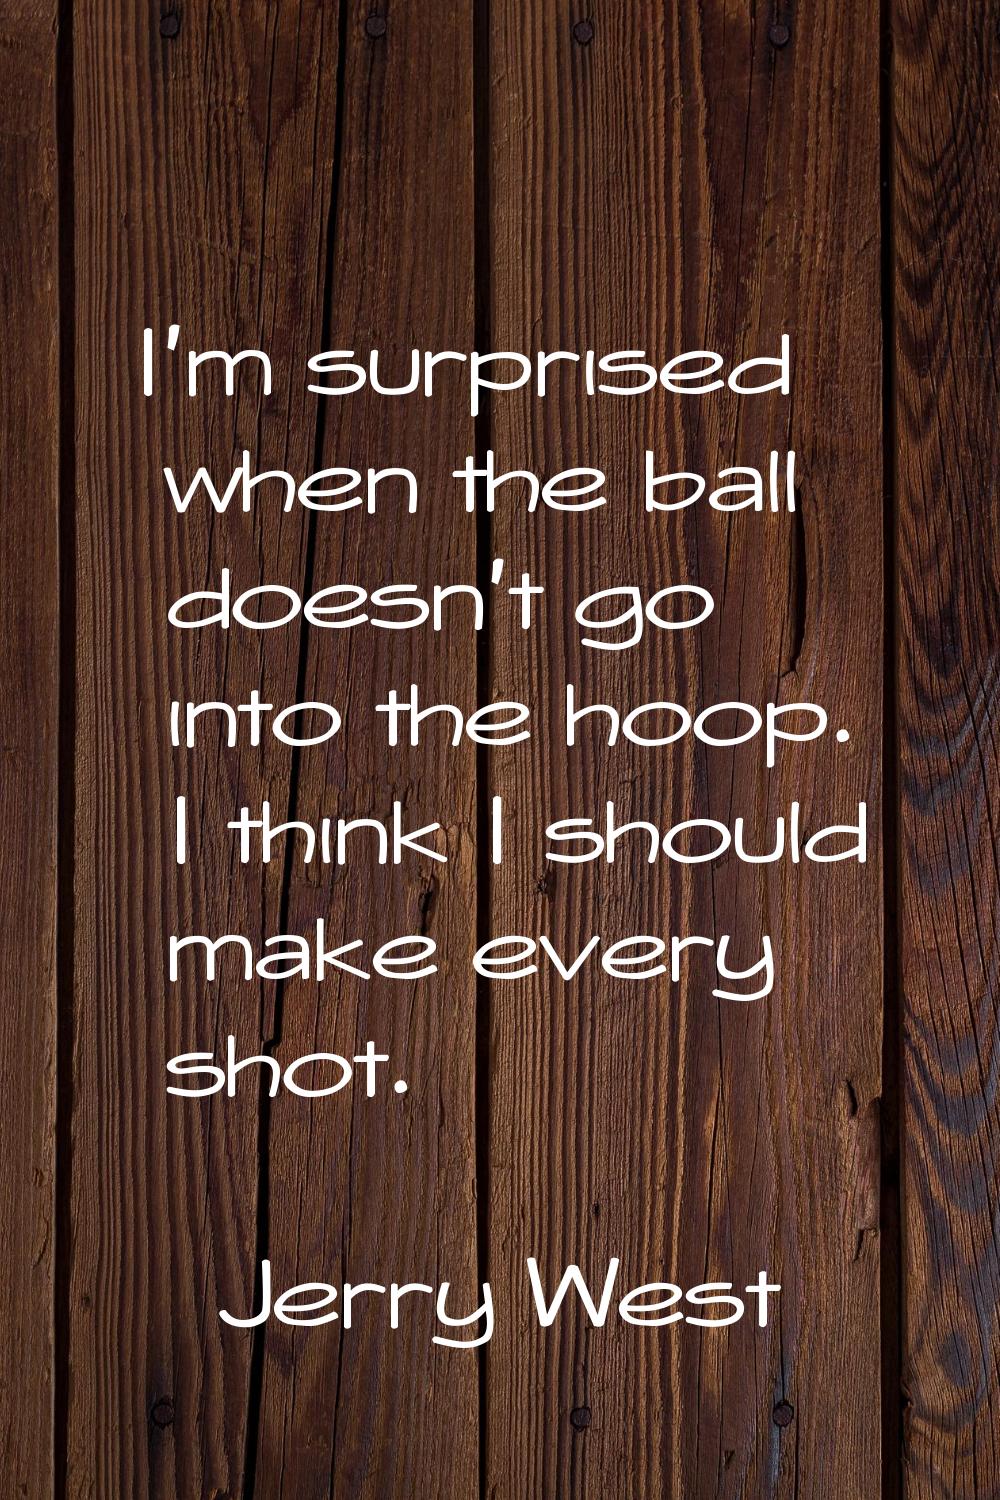 I'm surprised when the ball doesn't go into the hoop. I think I should make every shot.